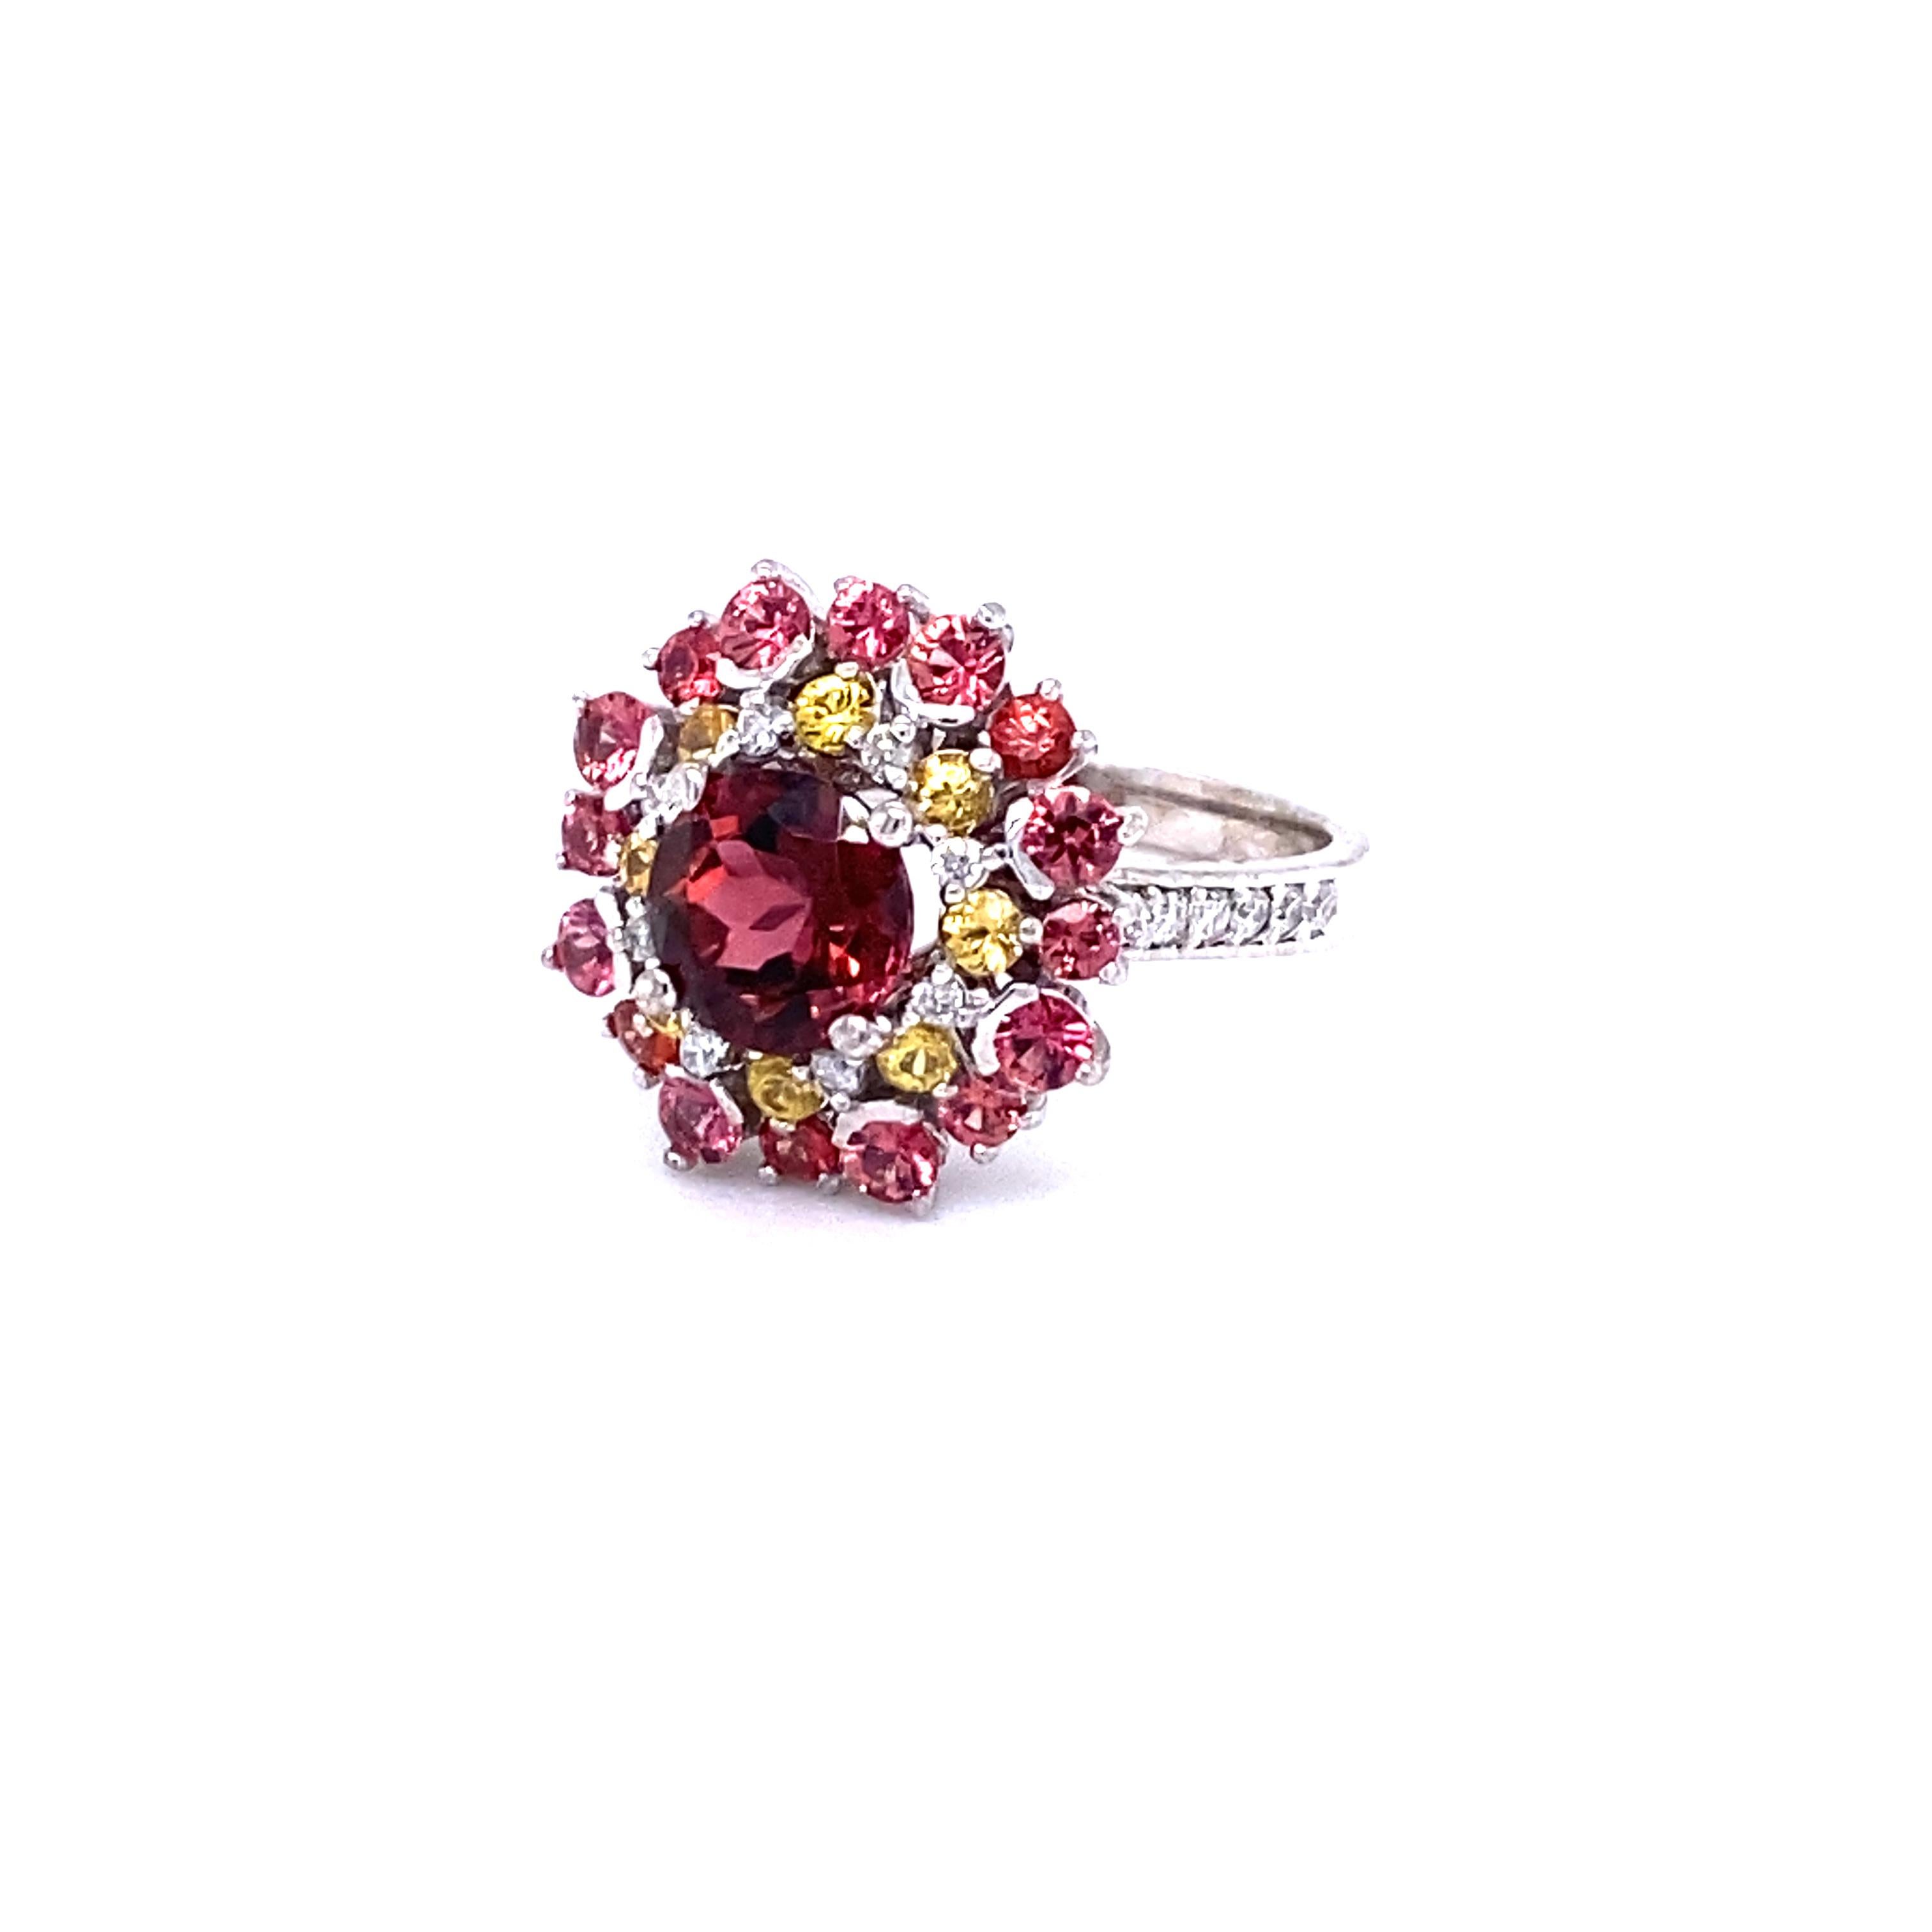 Stunning and uniquely designed 3.44 Carat Tourmaline, Red and Yellow Sapphire and Diamond White Gold Cocktail Ring! 

This ring has a 1.78 Carat Round Cut Tourmaline and is surrounded by 24 Round Cut Yellow and Red Sapphires that weigh 1.41 Carats